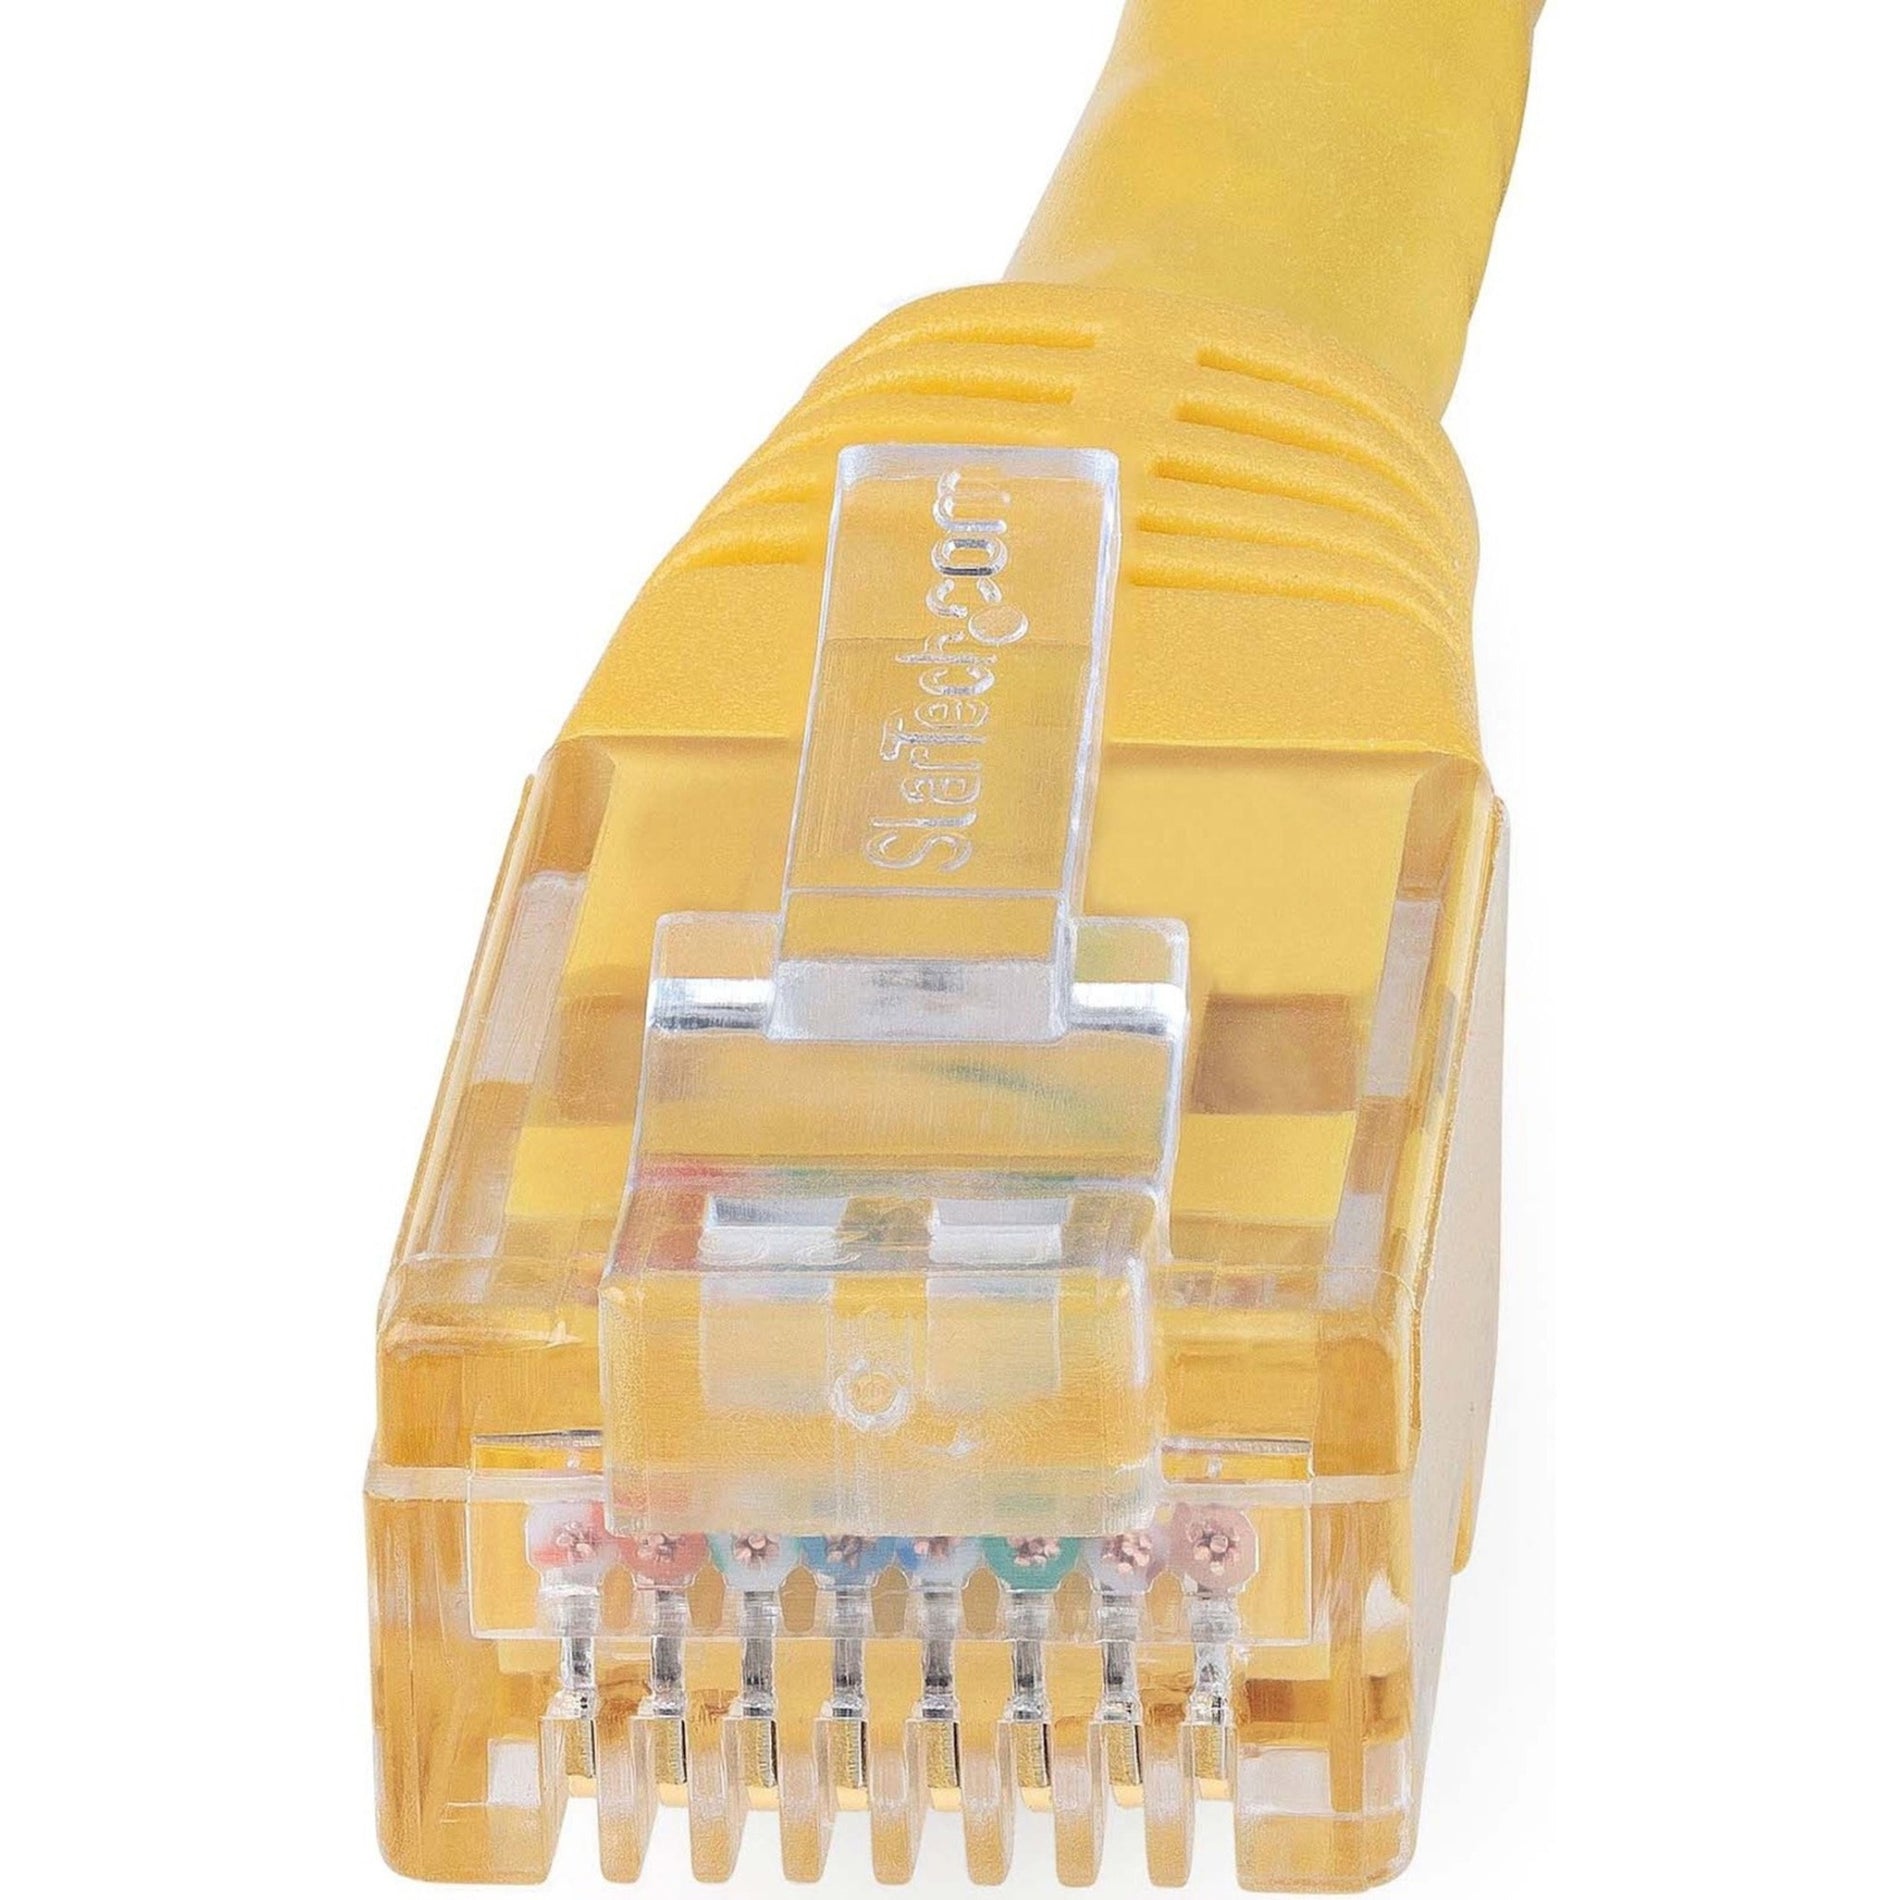 StarTech.com C6PATCH1YL 1ft Yellow Cat6 UTP Patch Cable ETL Verified, 10 Gbit/s Data Transfer Rate, PoE, Bend Resistant, Rust Resistant, Fray Resistant, Stranded, PoE++, Corrosion Resistant, Damage Resistant, Molded, Strain Relief